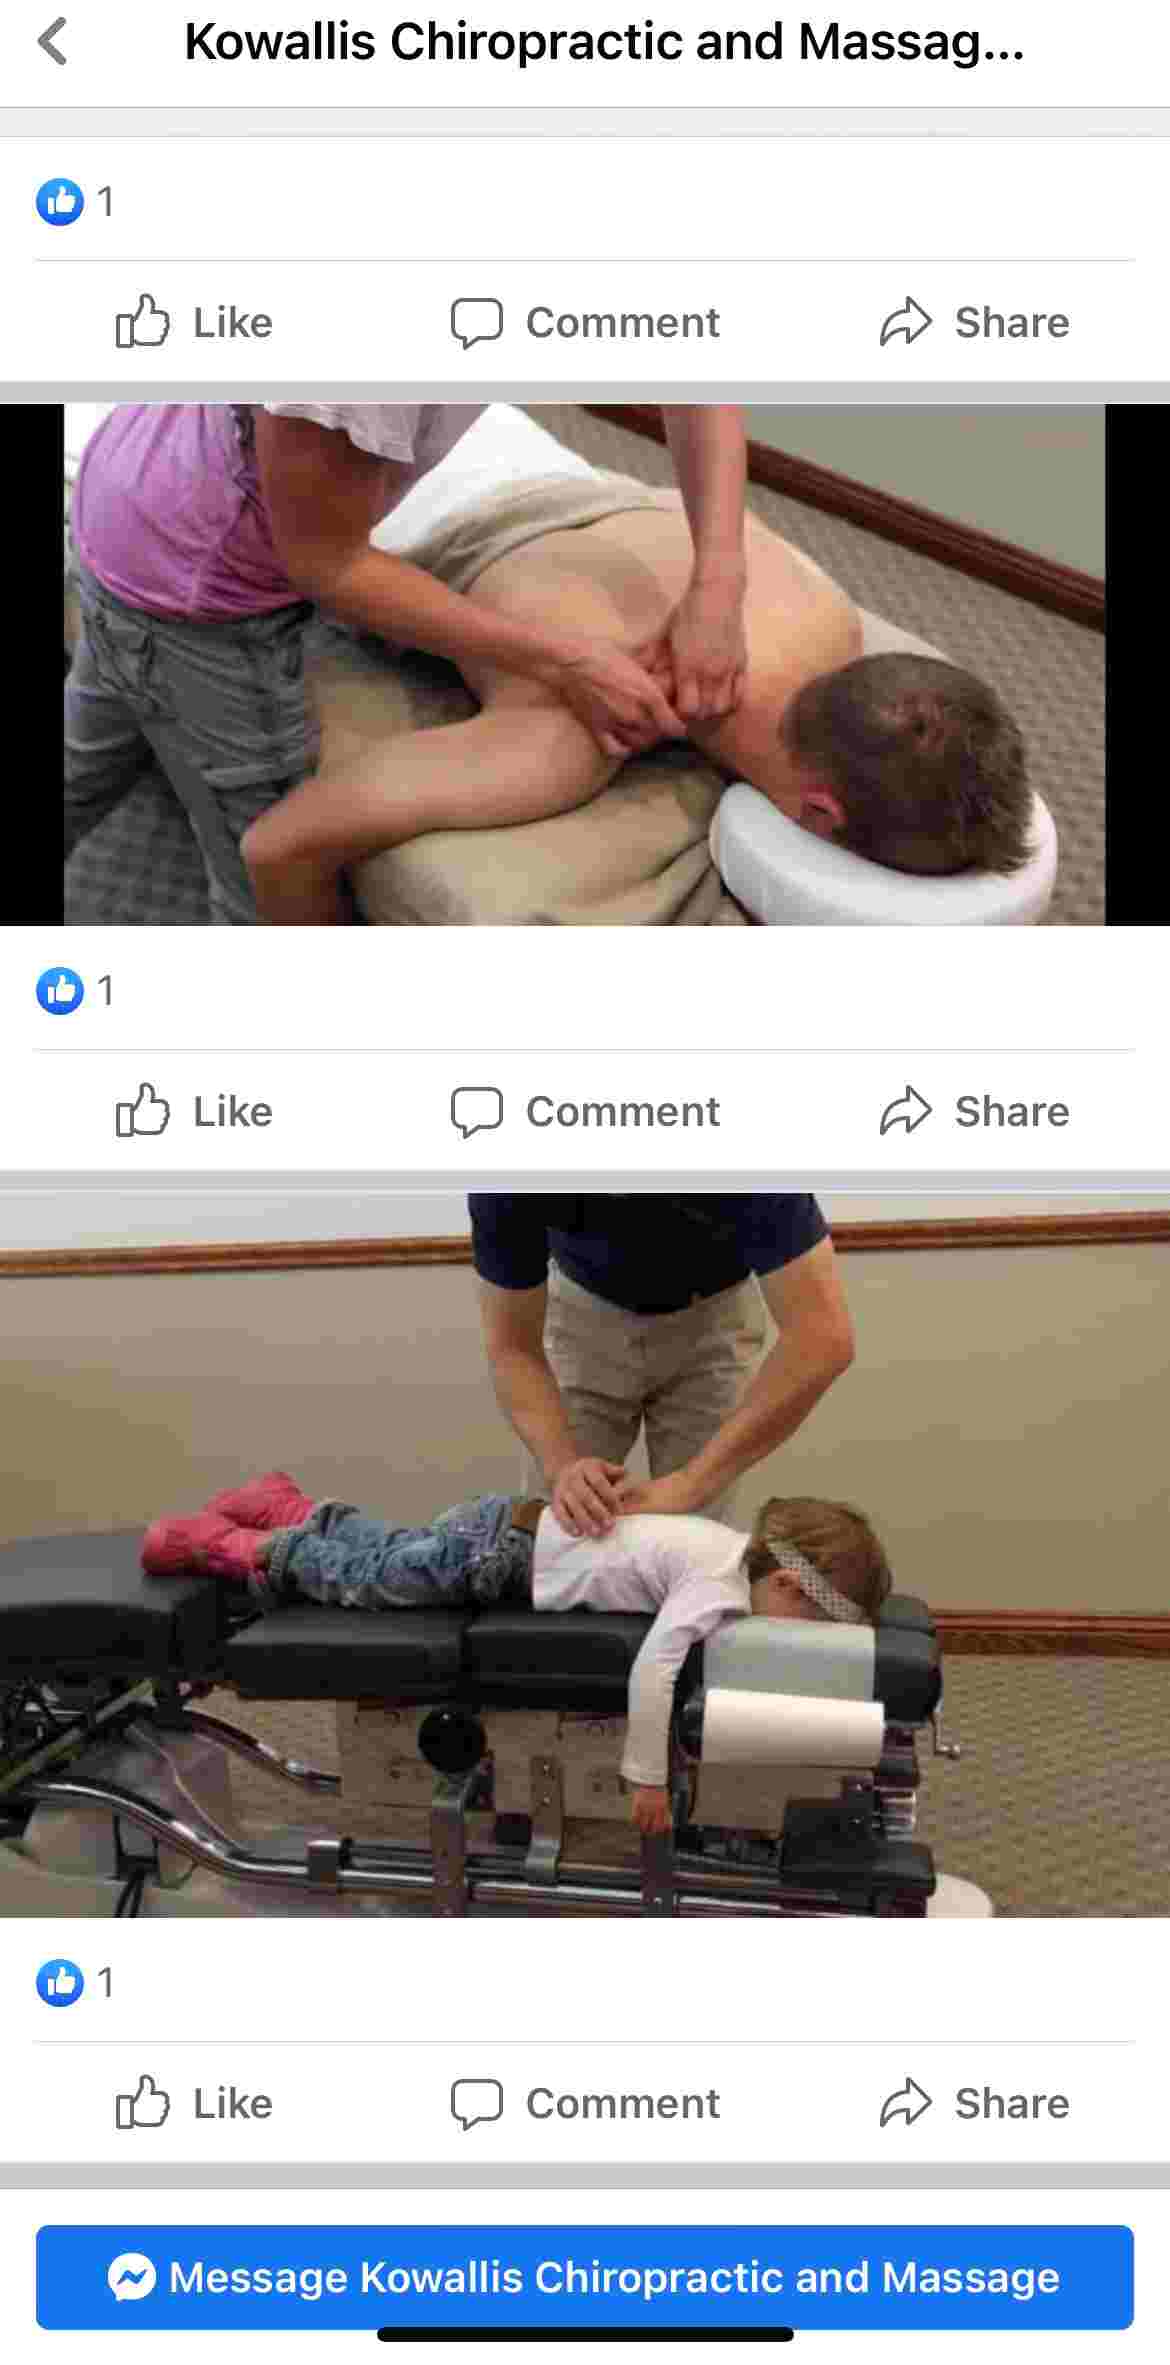 Attached images of the chiropractic referral program Facebook post